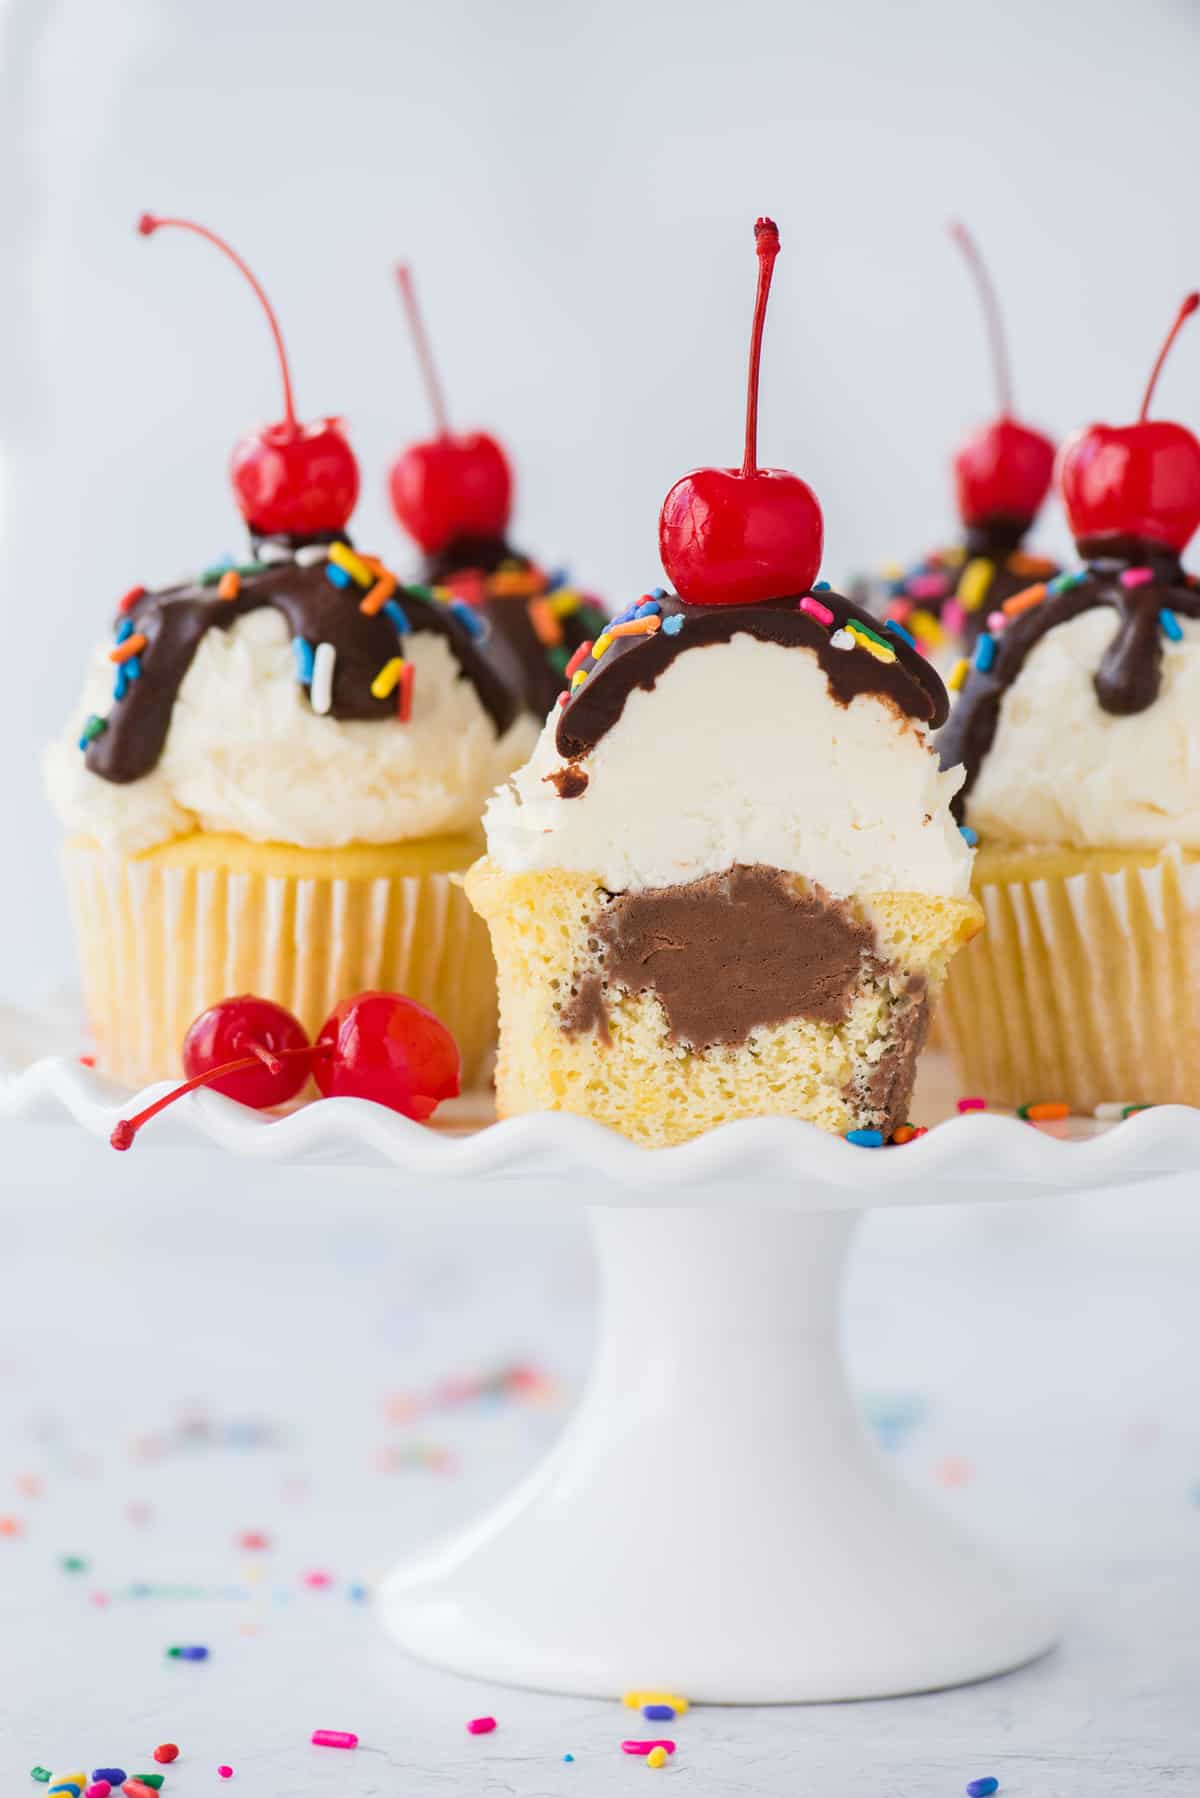 ice cream cupcakes with one cupcake cut in half showing chocolate ice cream center displayed on white cake stand on white background